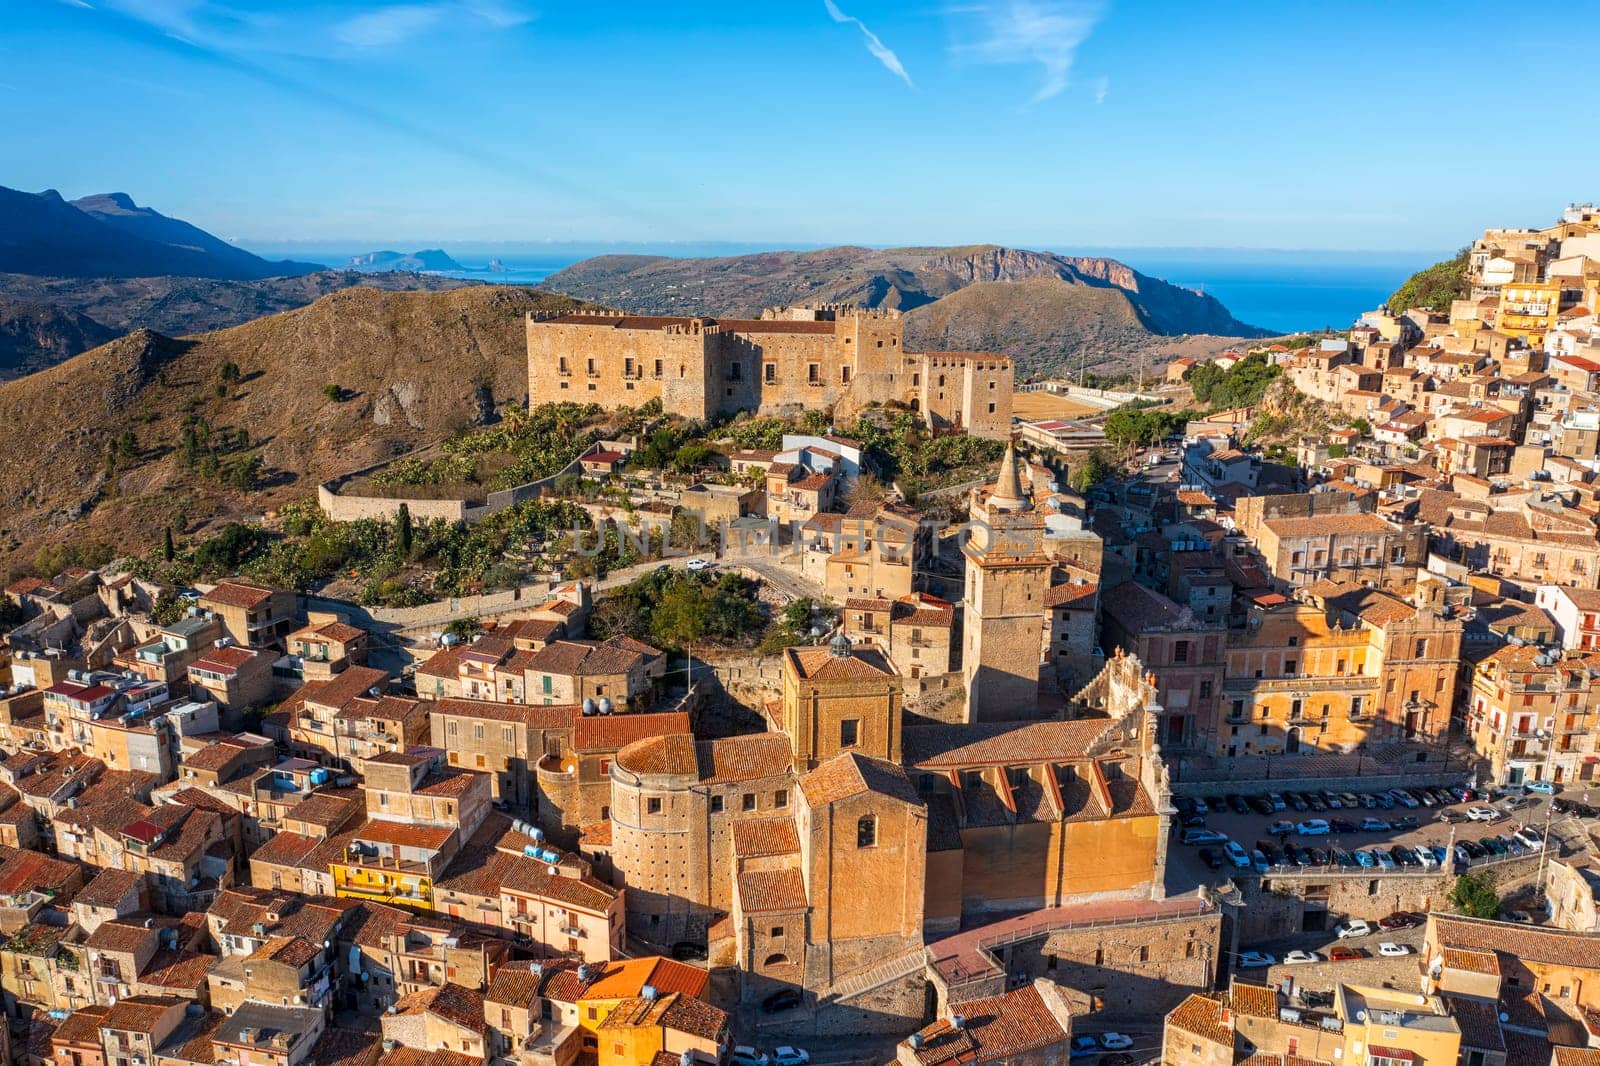 Caccamo, Sicily, Italy. View of popular hilltop medieval town with impressive Norman castle and big cathedral by EdVal